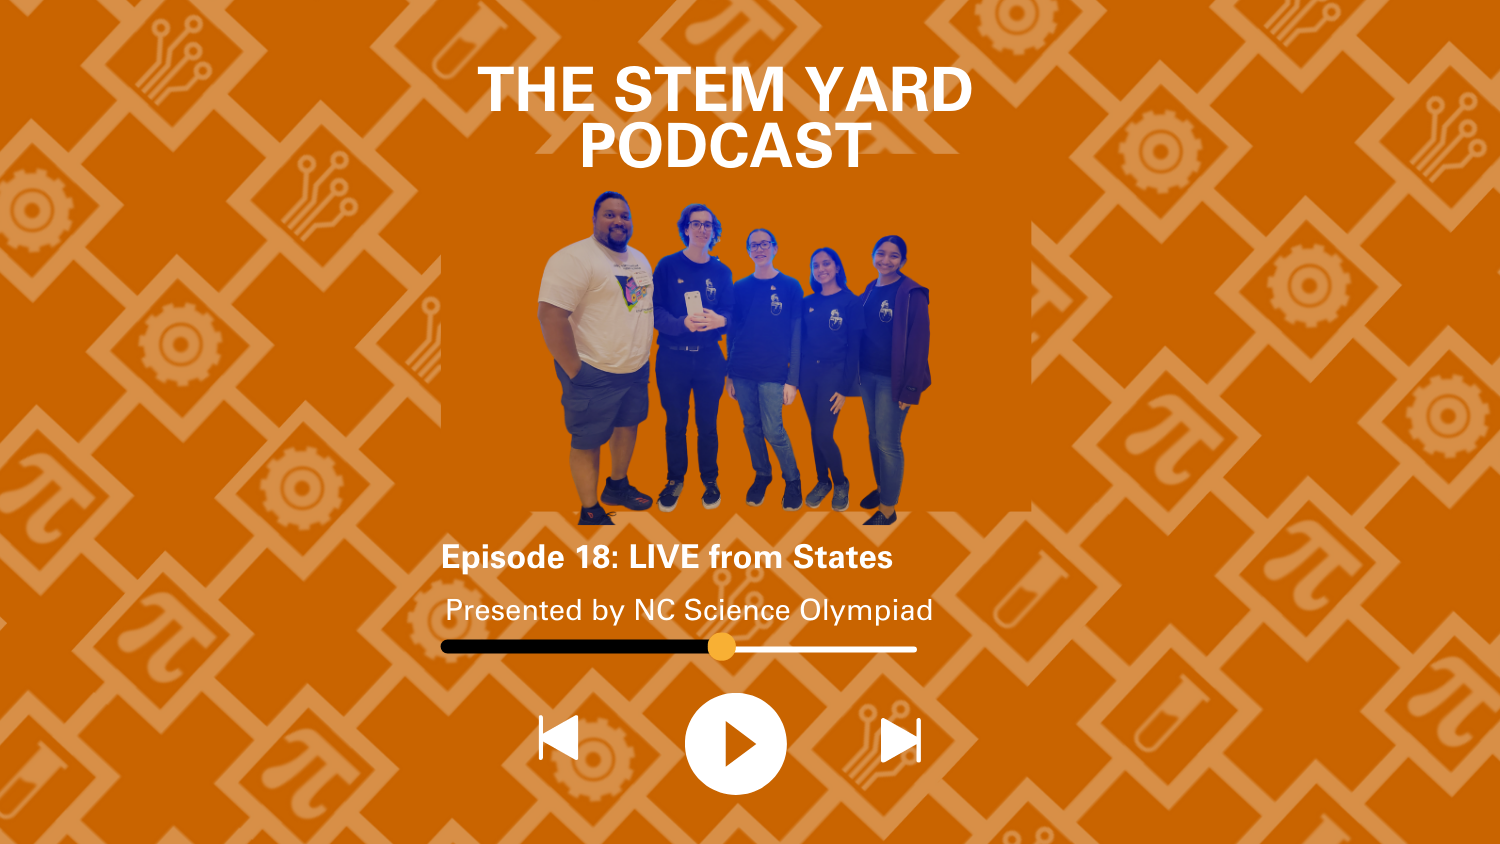 The STEM yard Podcast - Episode 18 LIVE from States